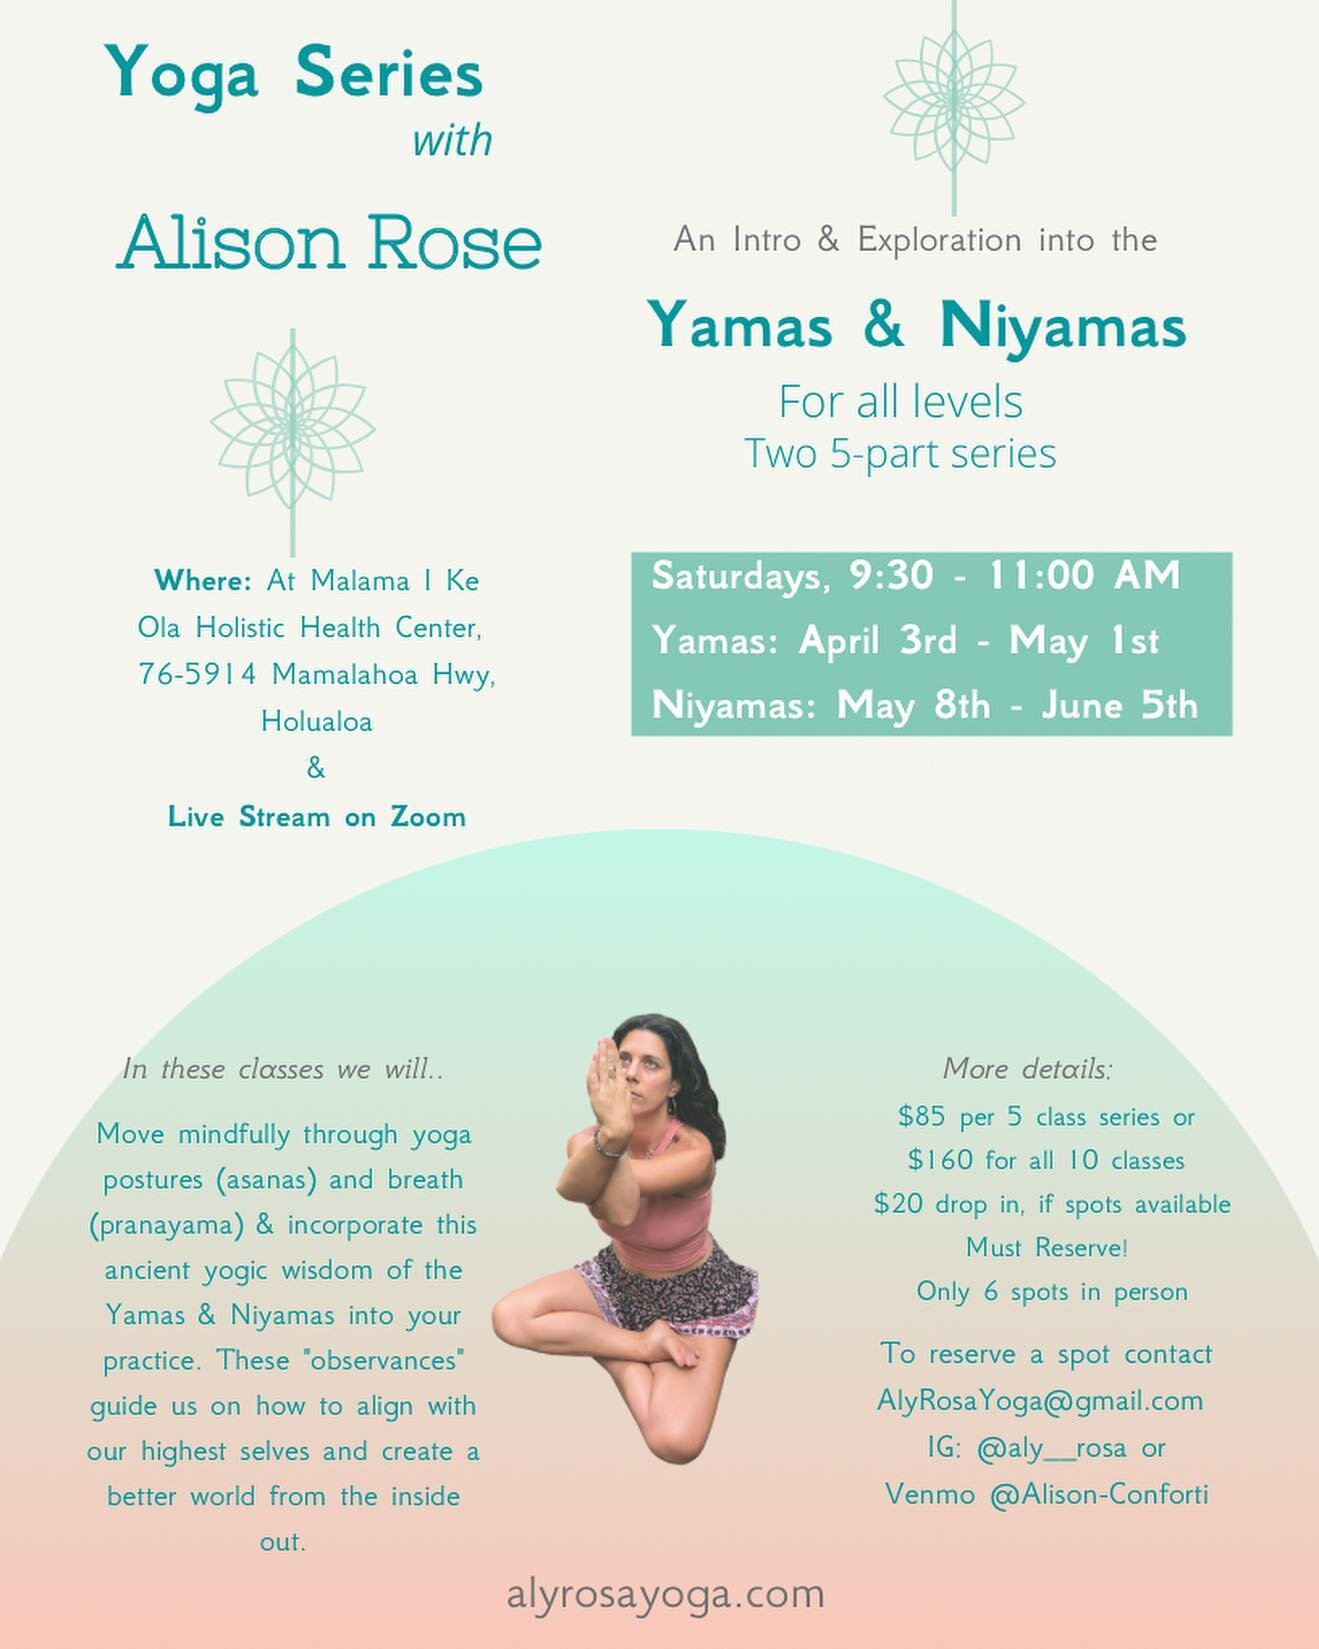 Yoga has the power to change the world through realizing our interconnectedness, recognizing we are all Divine beings, and aligning ourselves to lead a heart centered life. The Yamas &amp; Niyamas, are the first two of the eight limbs of yoga, accord